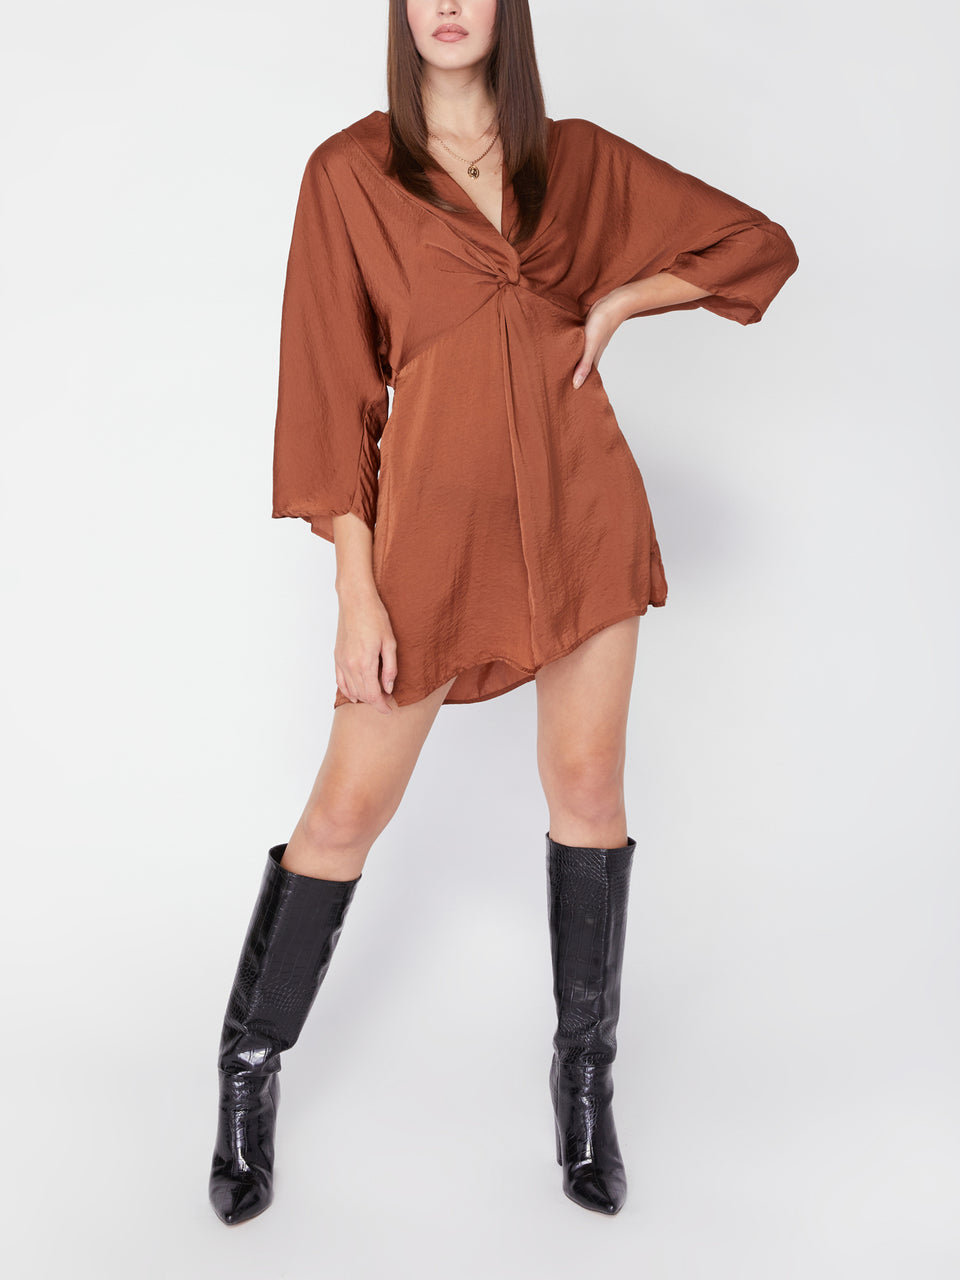 sadie_and_sage_its_never_too_late_knot_dress_caramel